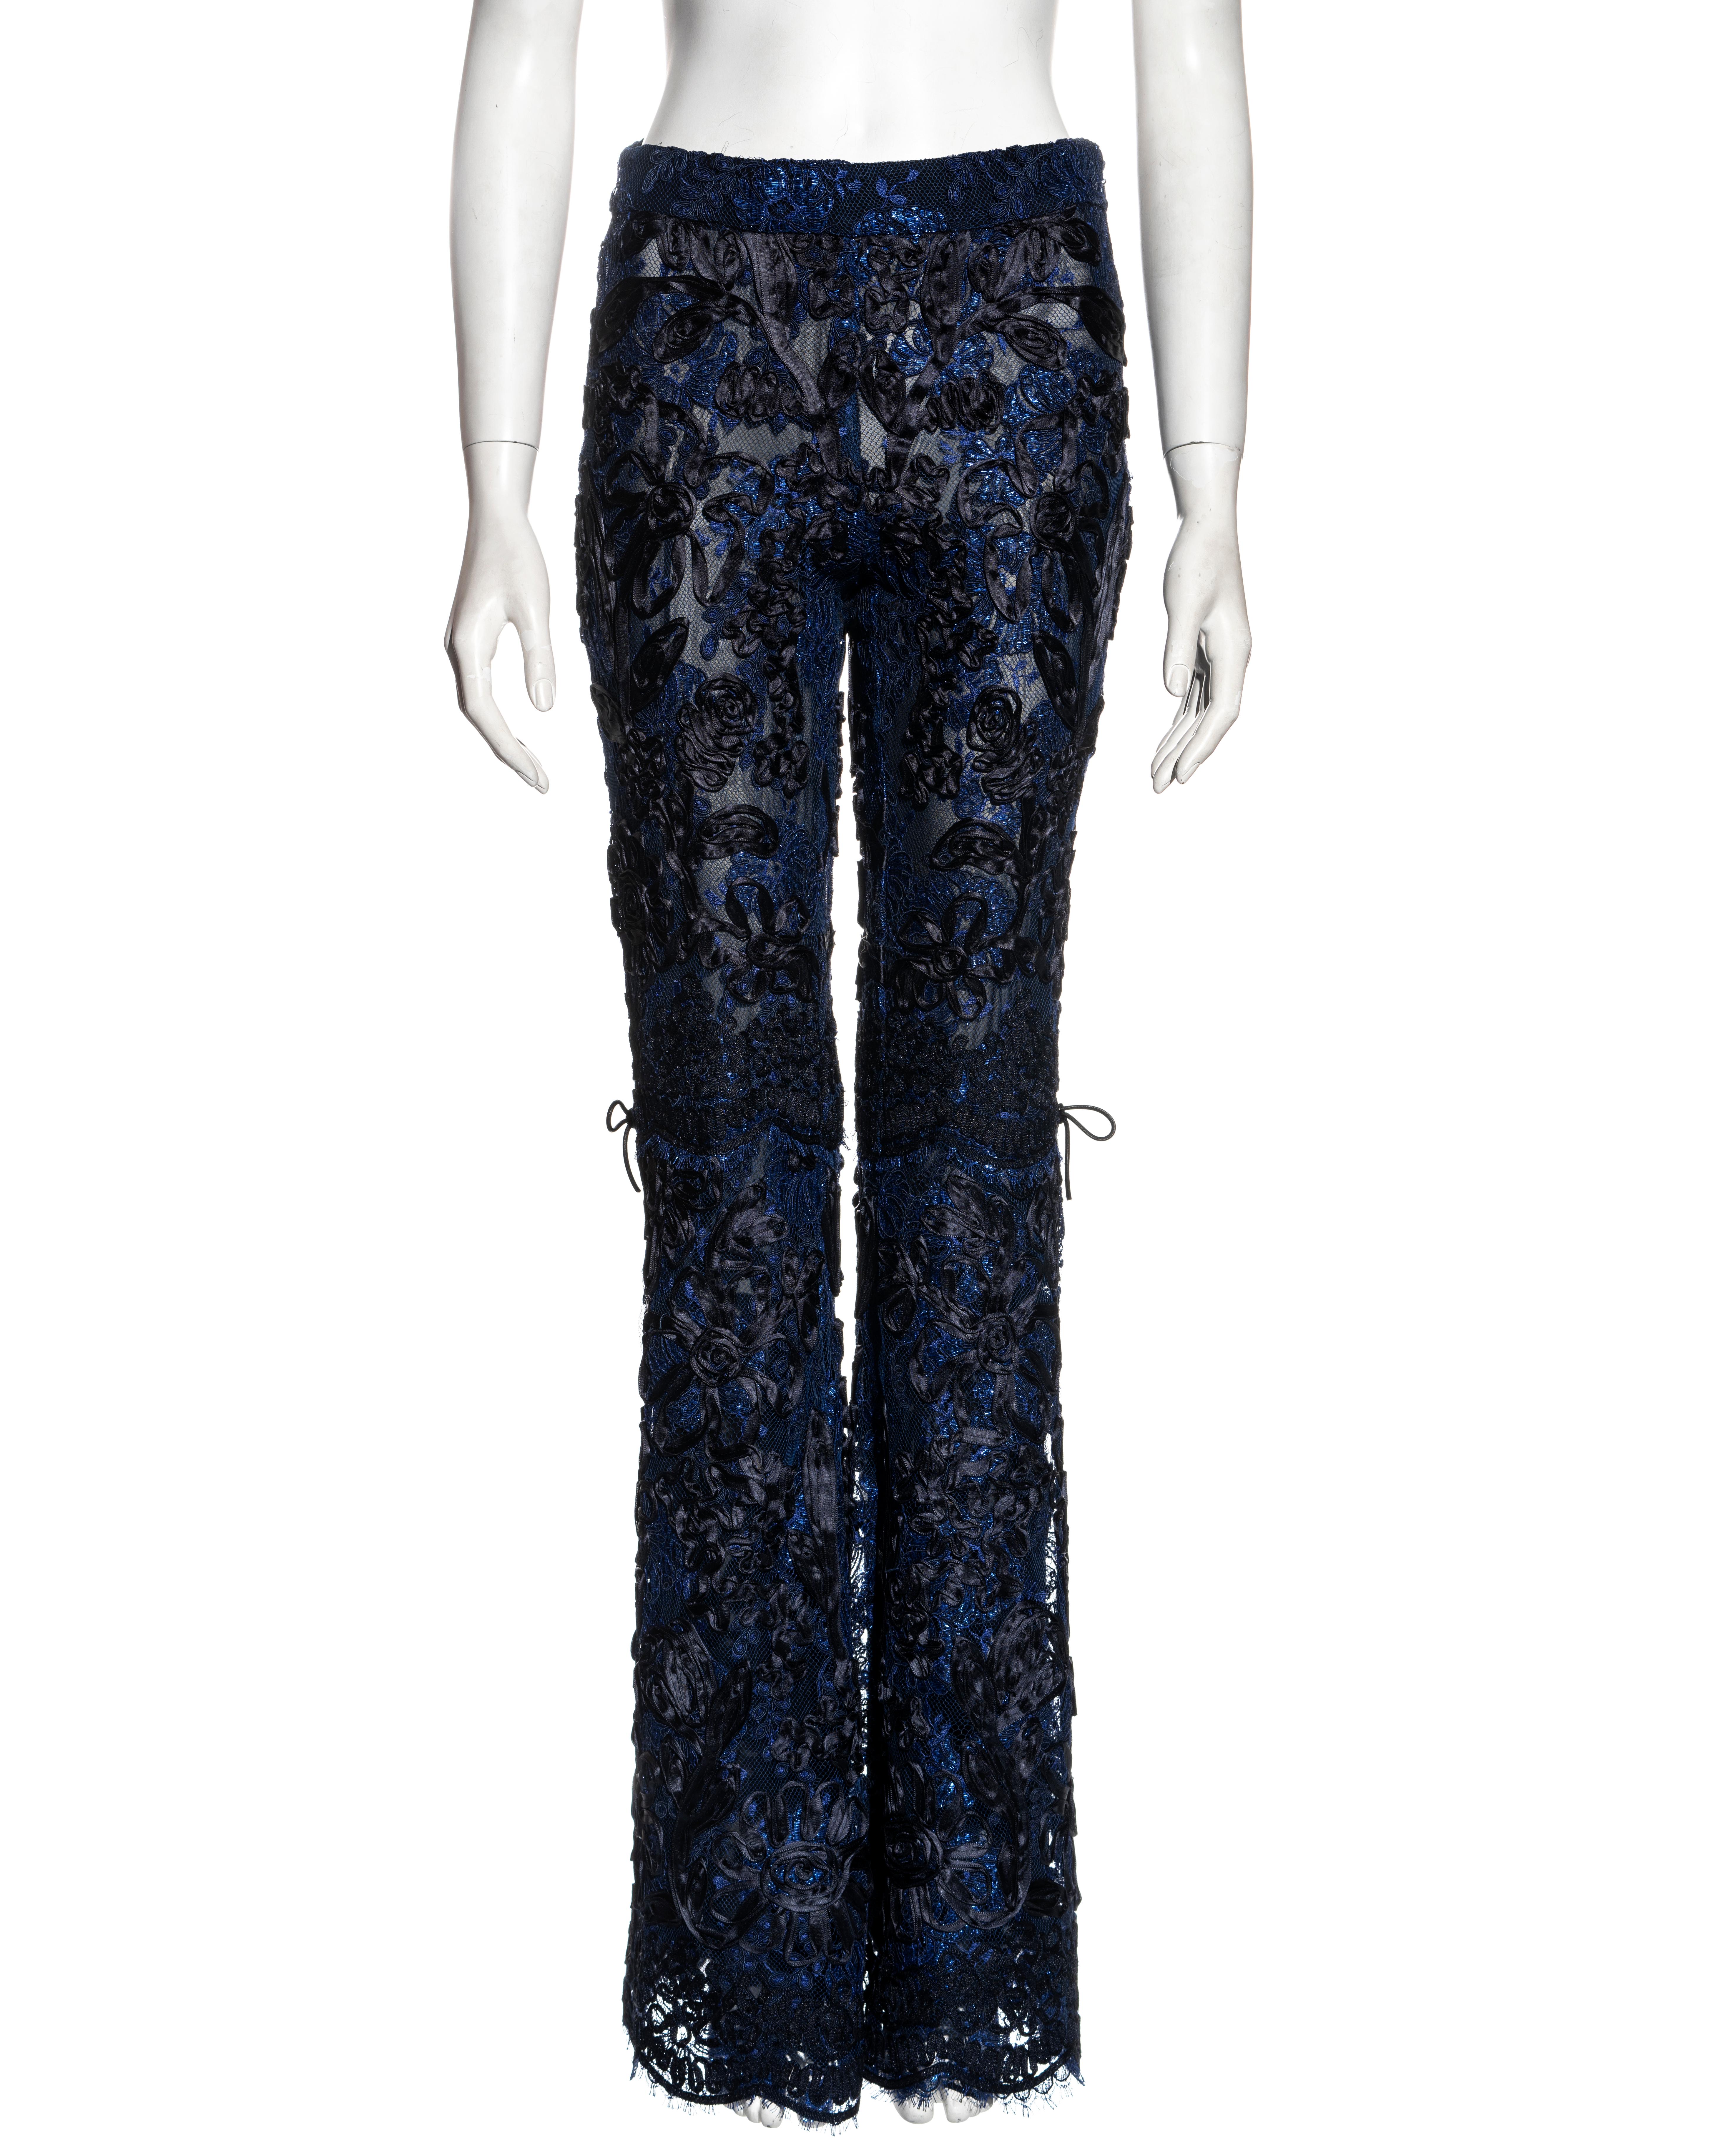 ▪ Gucci lace evening pants
▪ Designed by Tom Ford 
▪ Blue and black lamé floral lace
▪ Black ribbon embroidery
▪ Leather bows at the knees 
▪ Flared leg
▪ Silk chiffon lining 
▪ IT 40 - FR 36 - UK 8 - US 4
▪ Fall-Winter 1999
▪ 71% Rayon, 12% Cotton,